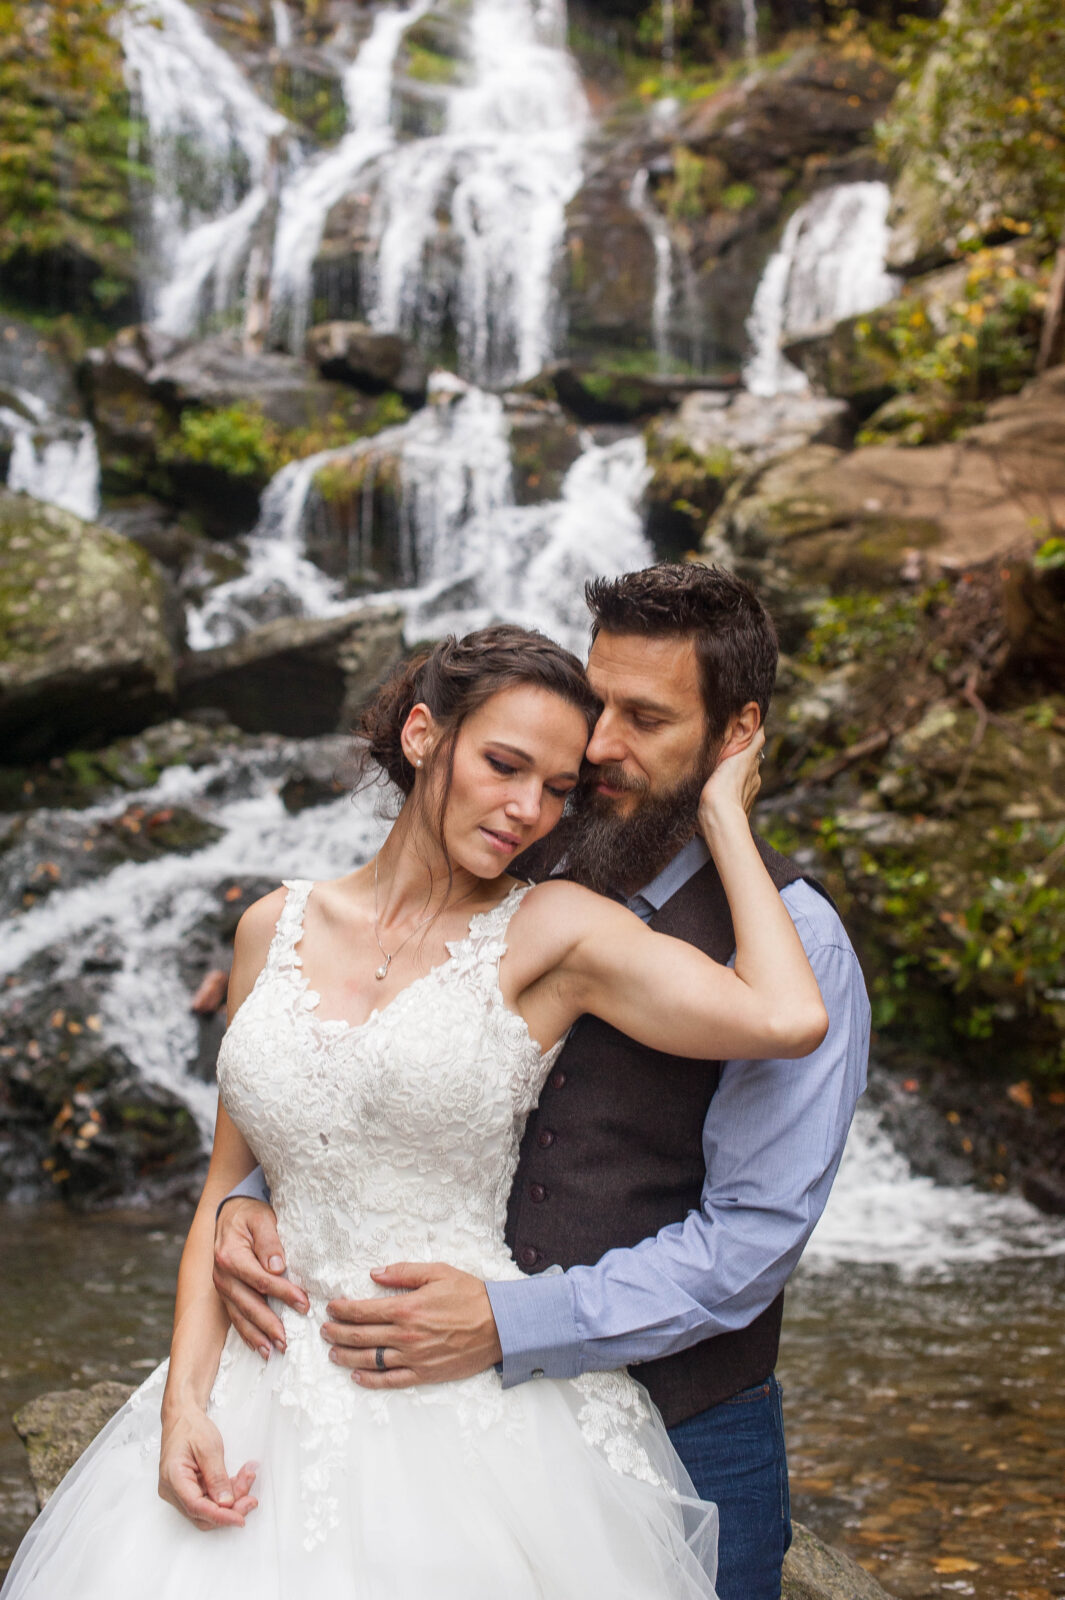 Bride in sweetheart neckline of an offwhite laced detailed dress relaxes into groom wearing a blue button down and vest in front of waterfalls near asheville nc